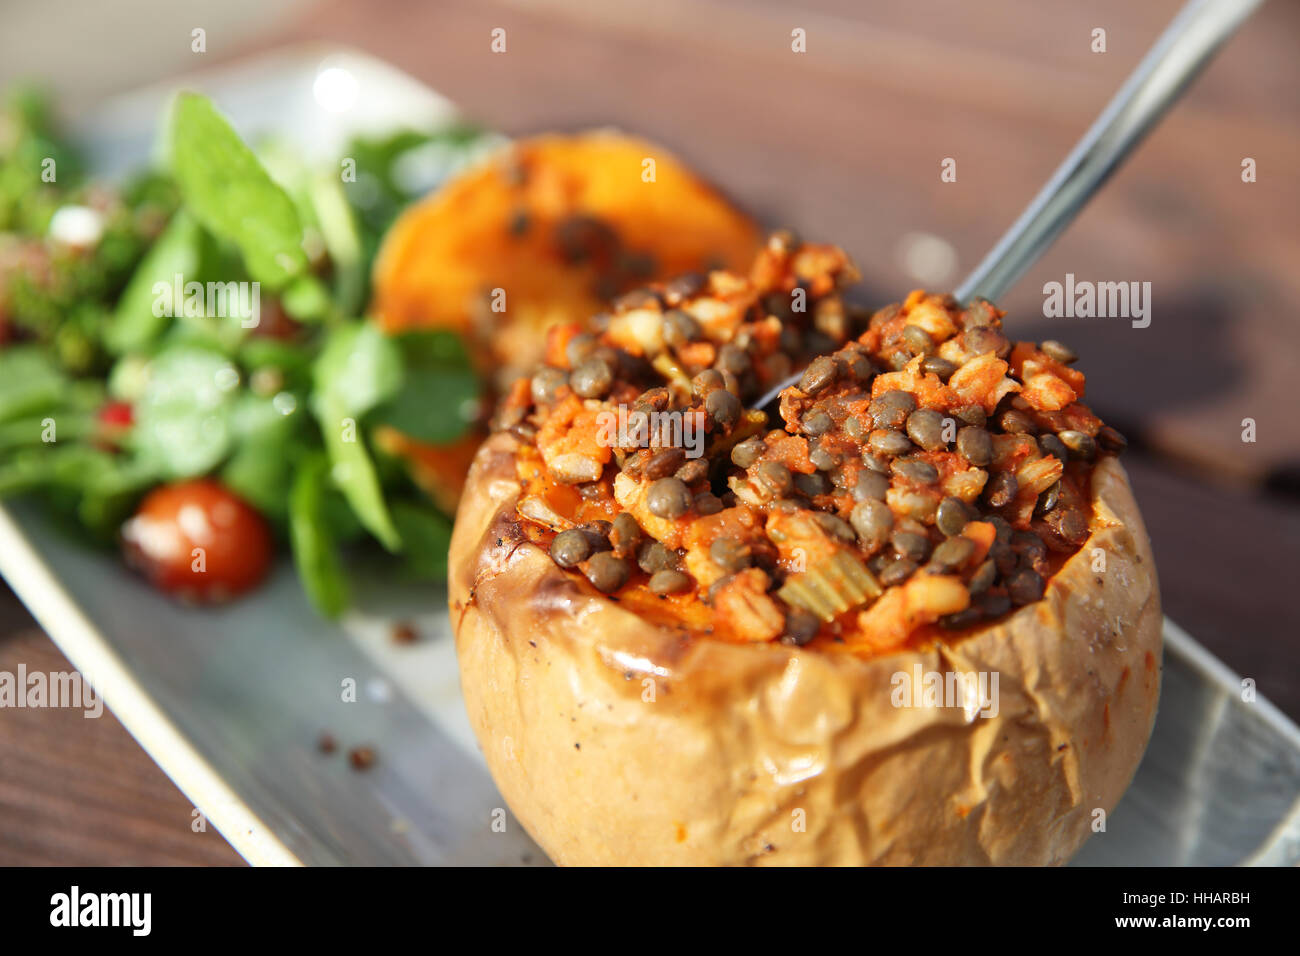 Warming and healthy autumn or fall lunchtime food, butternut squash, lentils and salad, in England, UK Stock Photo